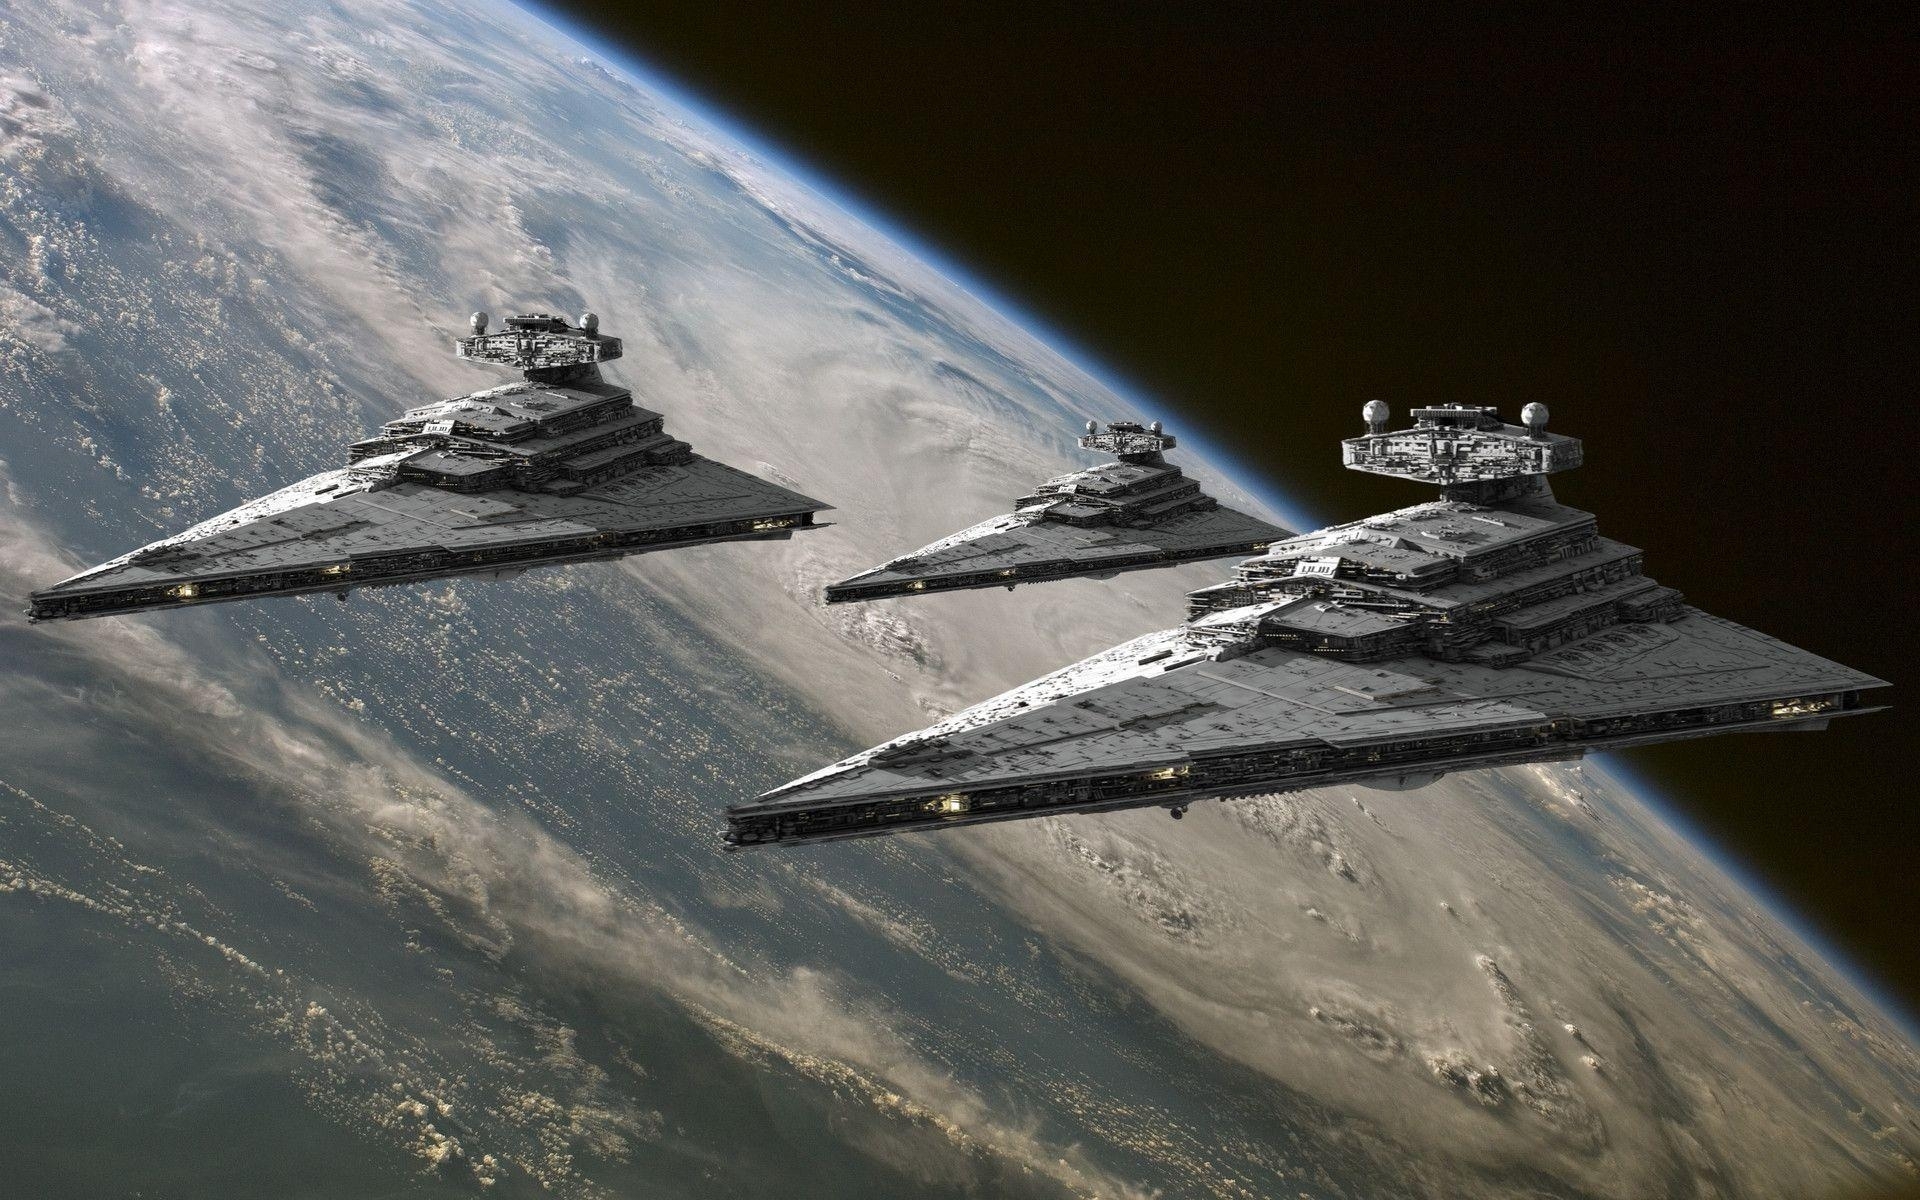 10 Latest Imperial Star Destroyer Wallpaper FULL HD 1920×1080 For PC Background